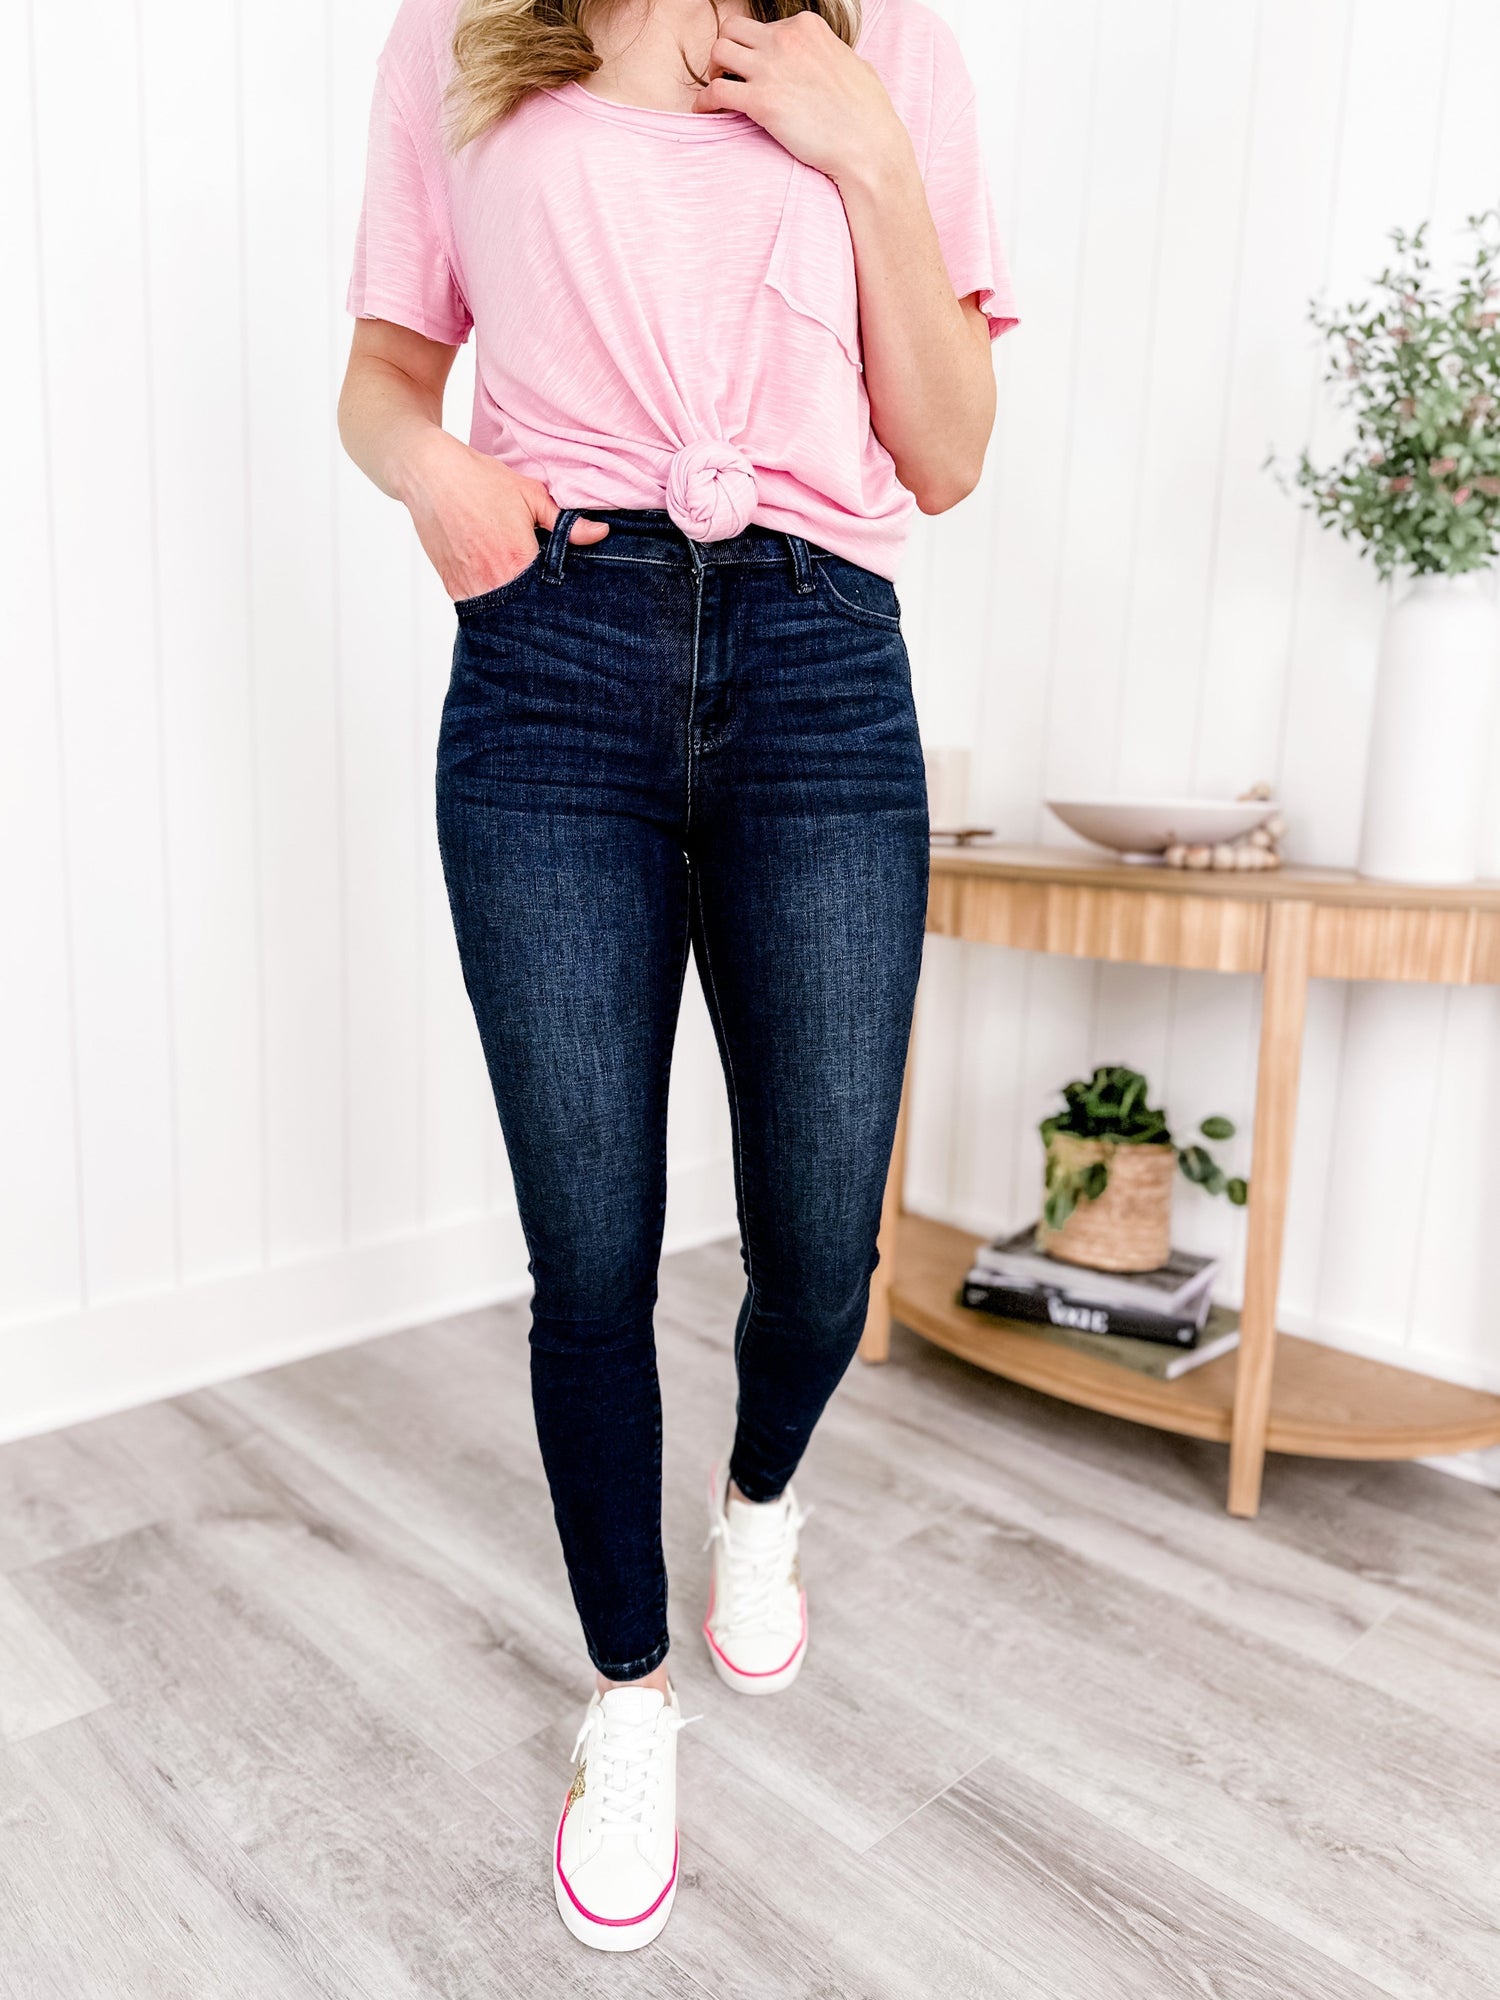 Judy Blue Everyday Wear 2.0 High Waist Non-Distressed Skinny Jeans